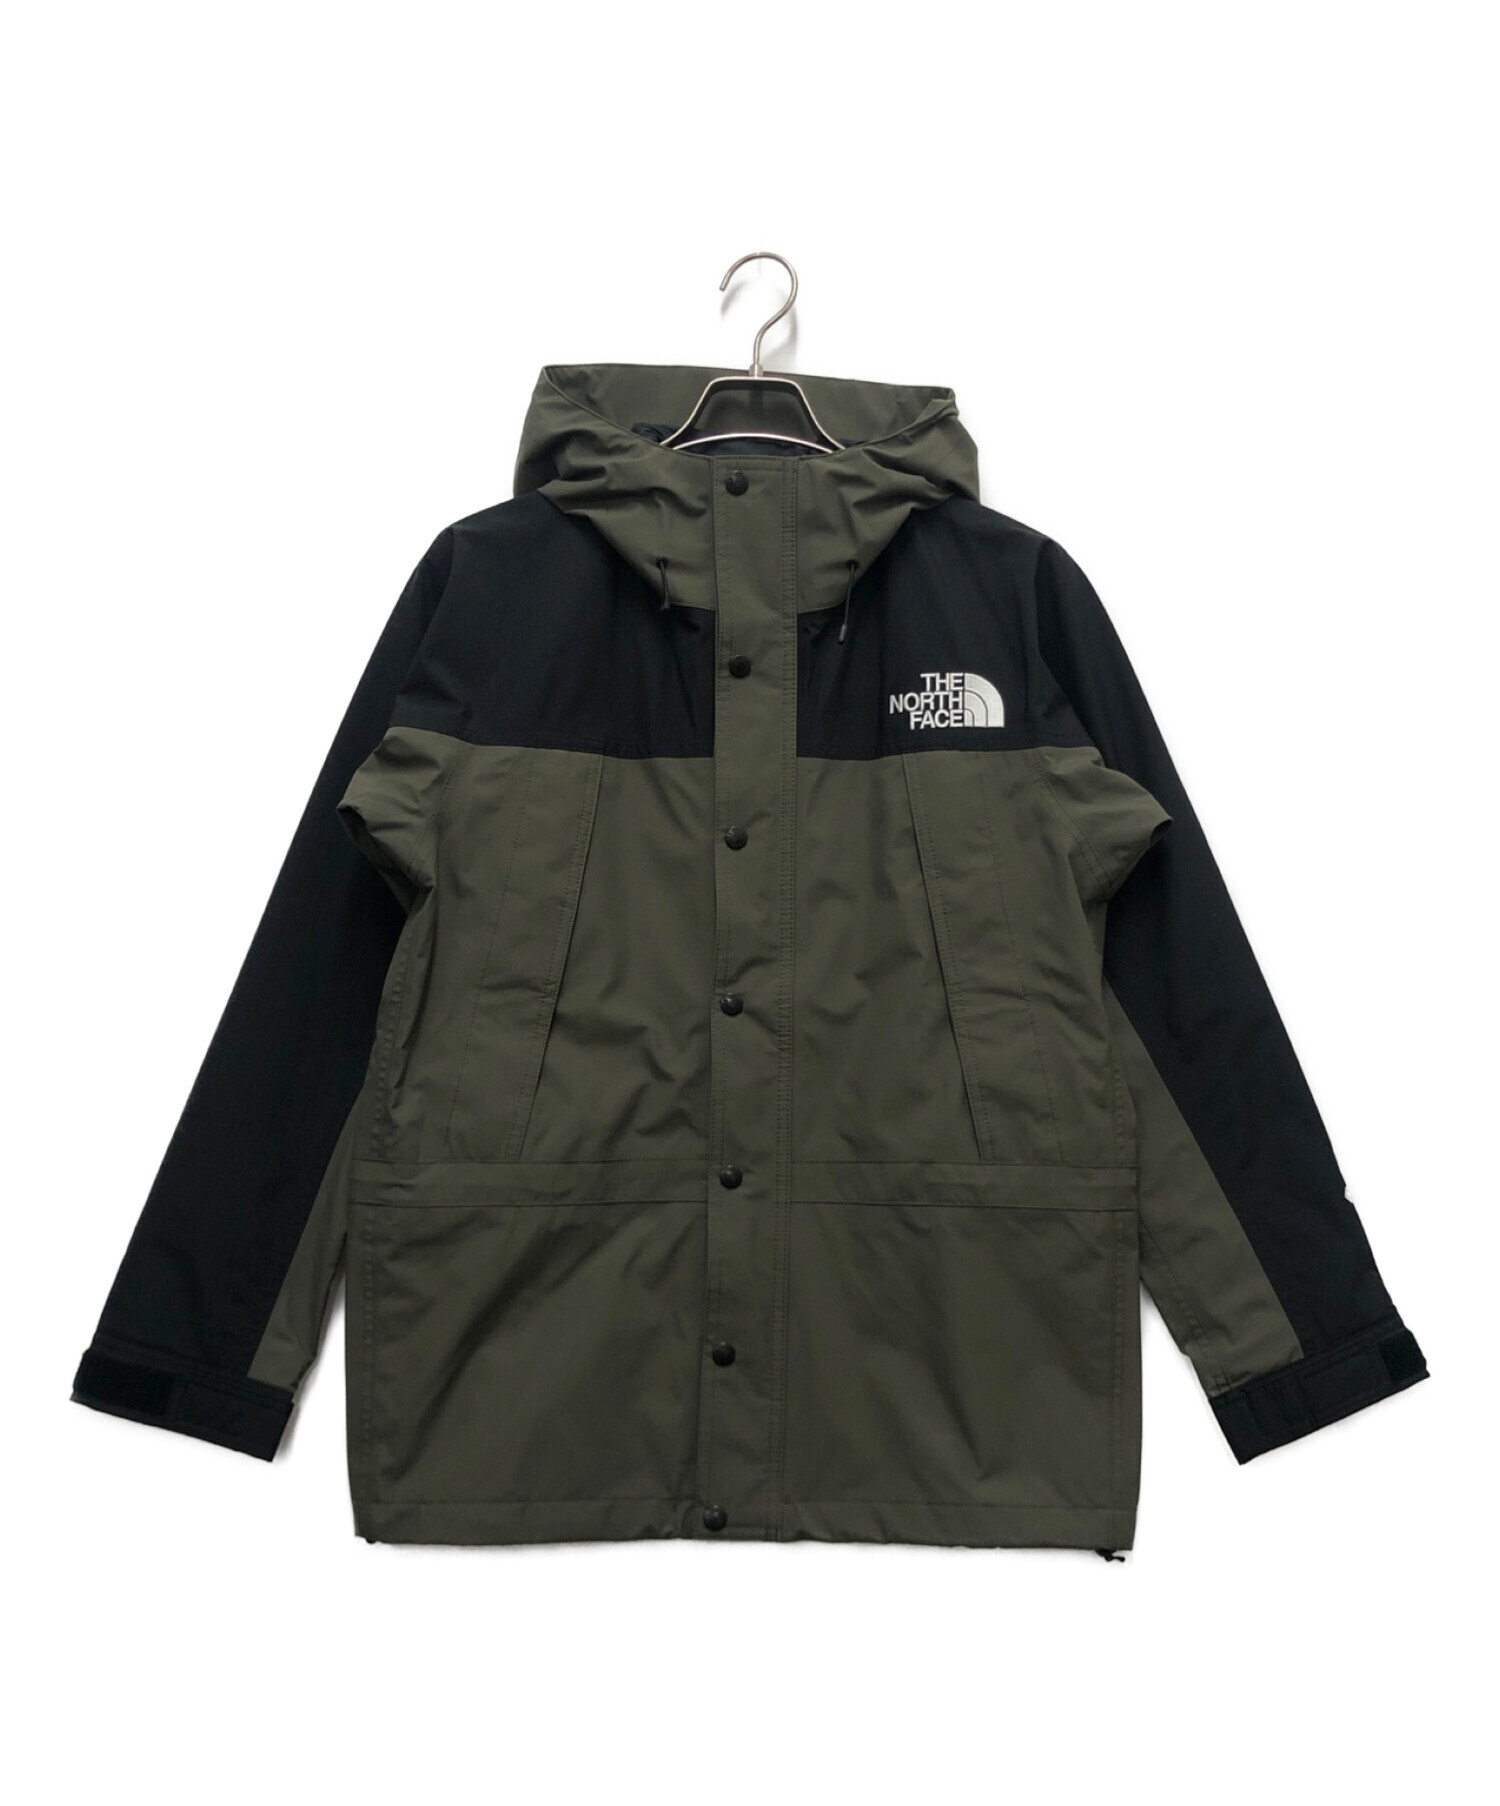 THE NORTH FACE MOUNTAIN LIGHT JACKET  S